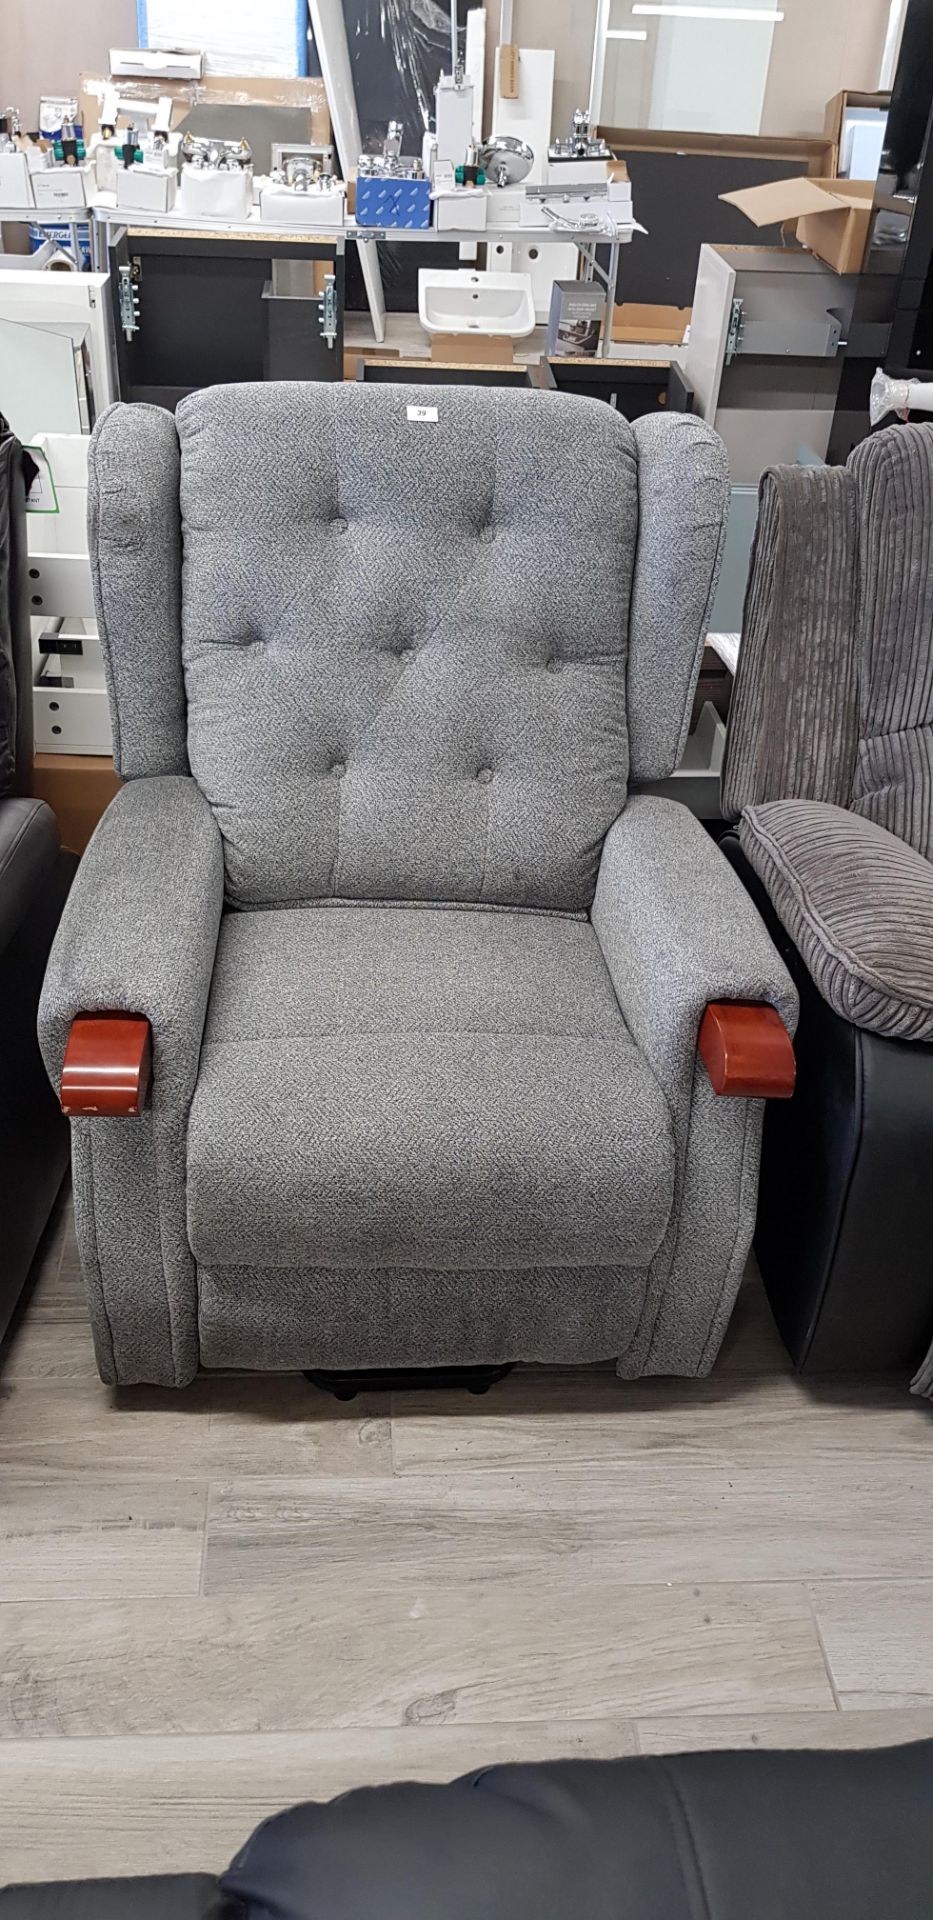 Grey / blue electric traditional style recliner chair